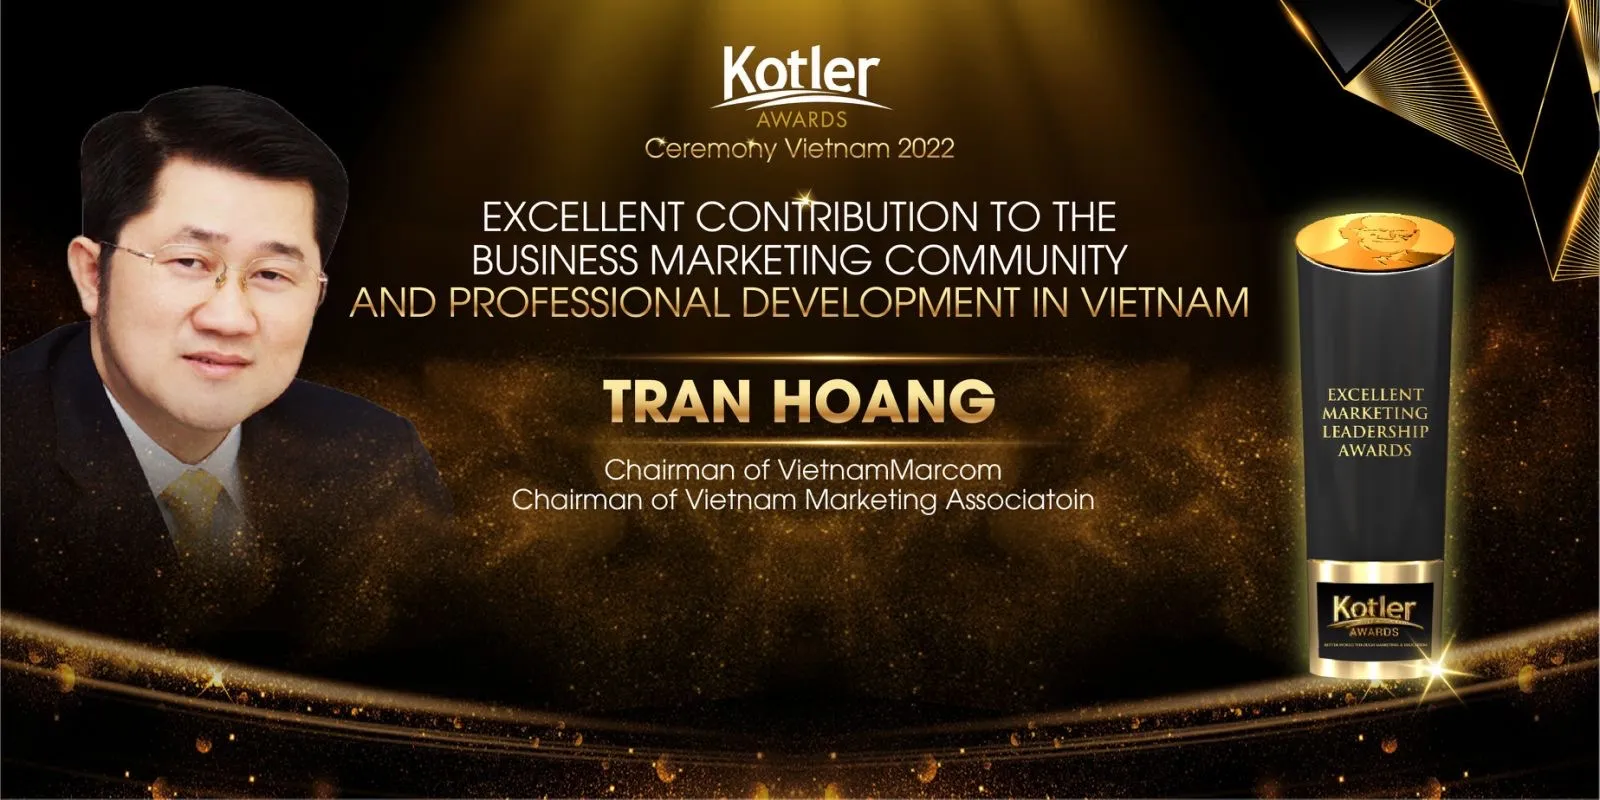 Tran Hoang is the founder and chairman of VietnamMarcom